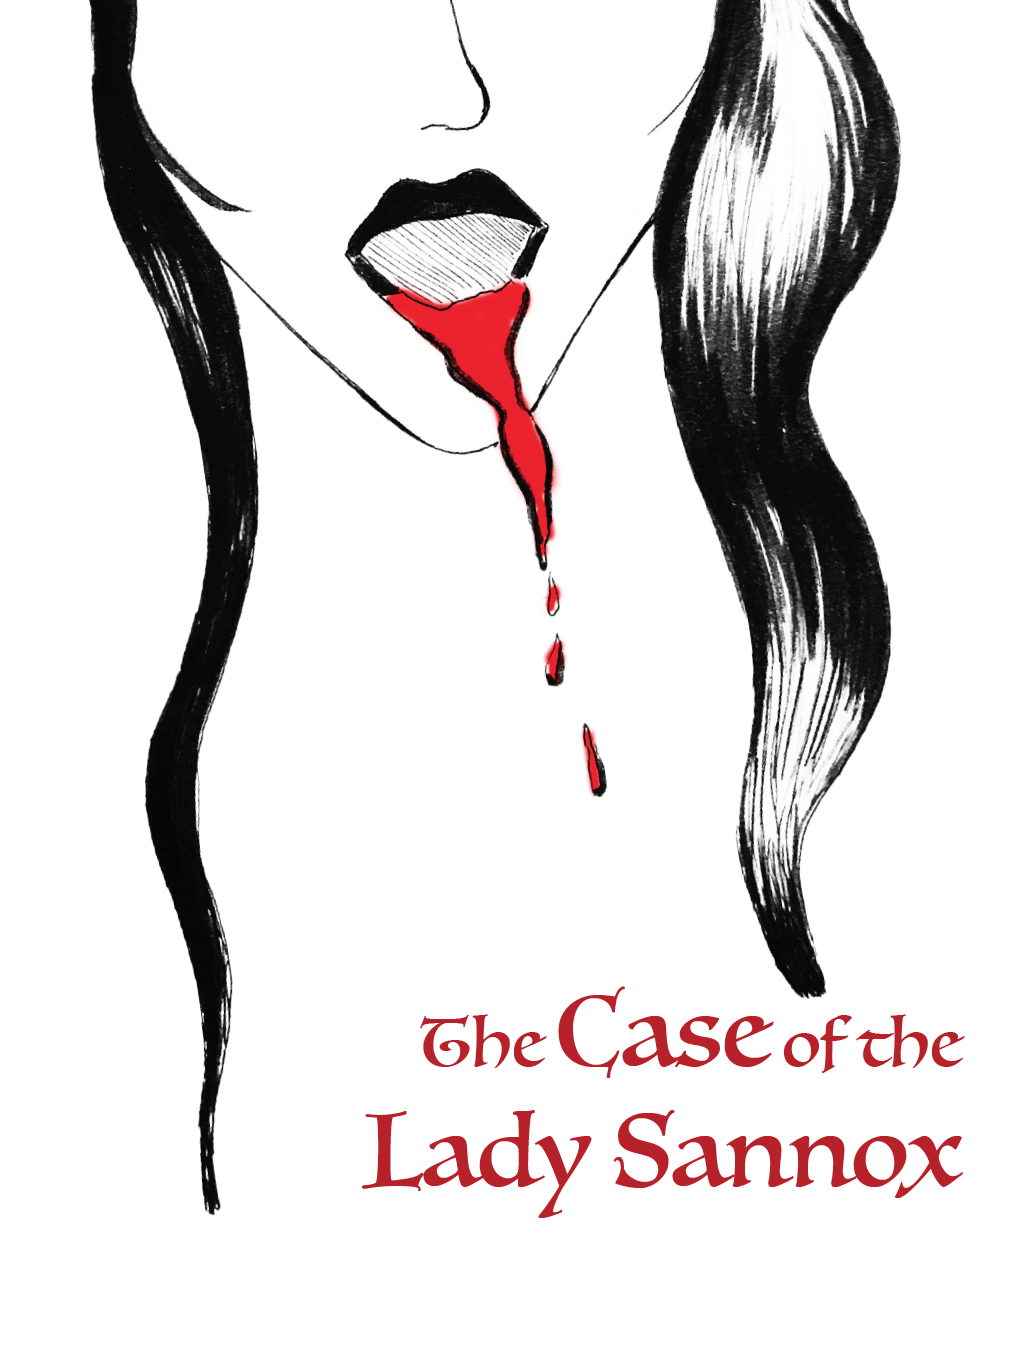 The Case of the Lady Sannox